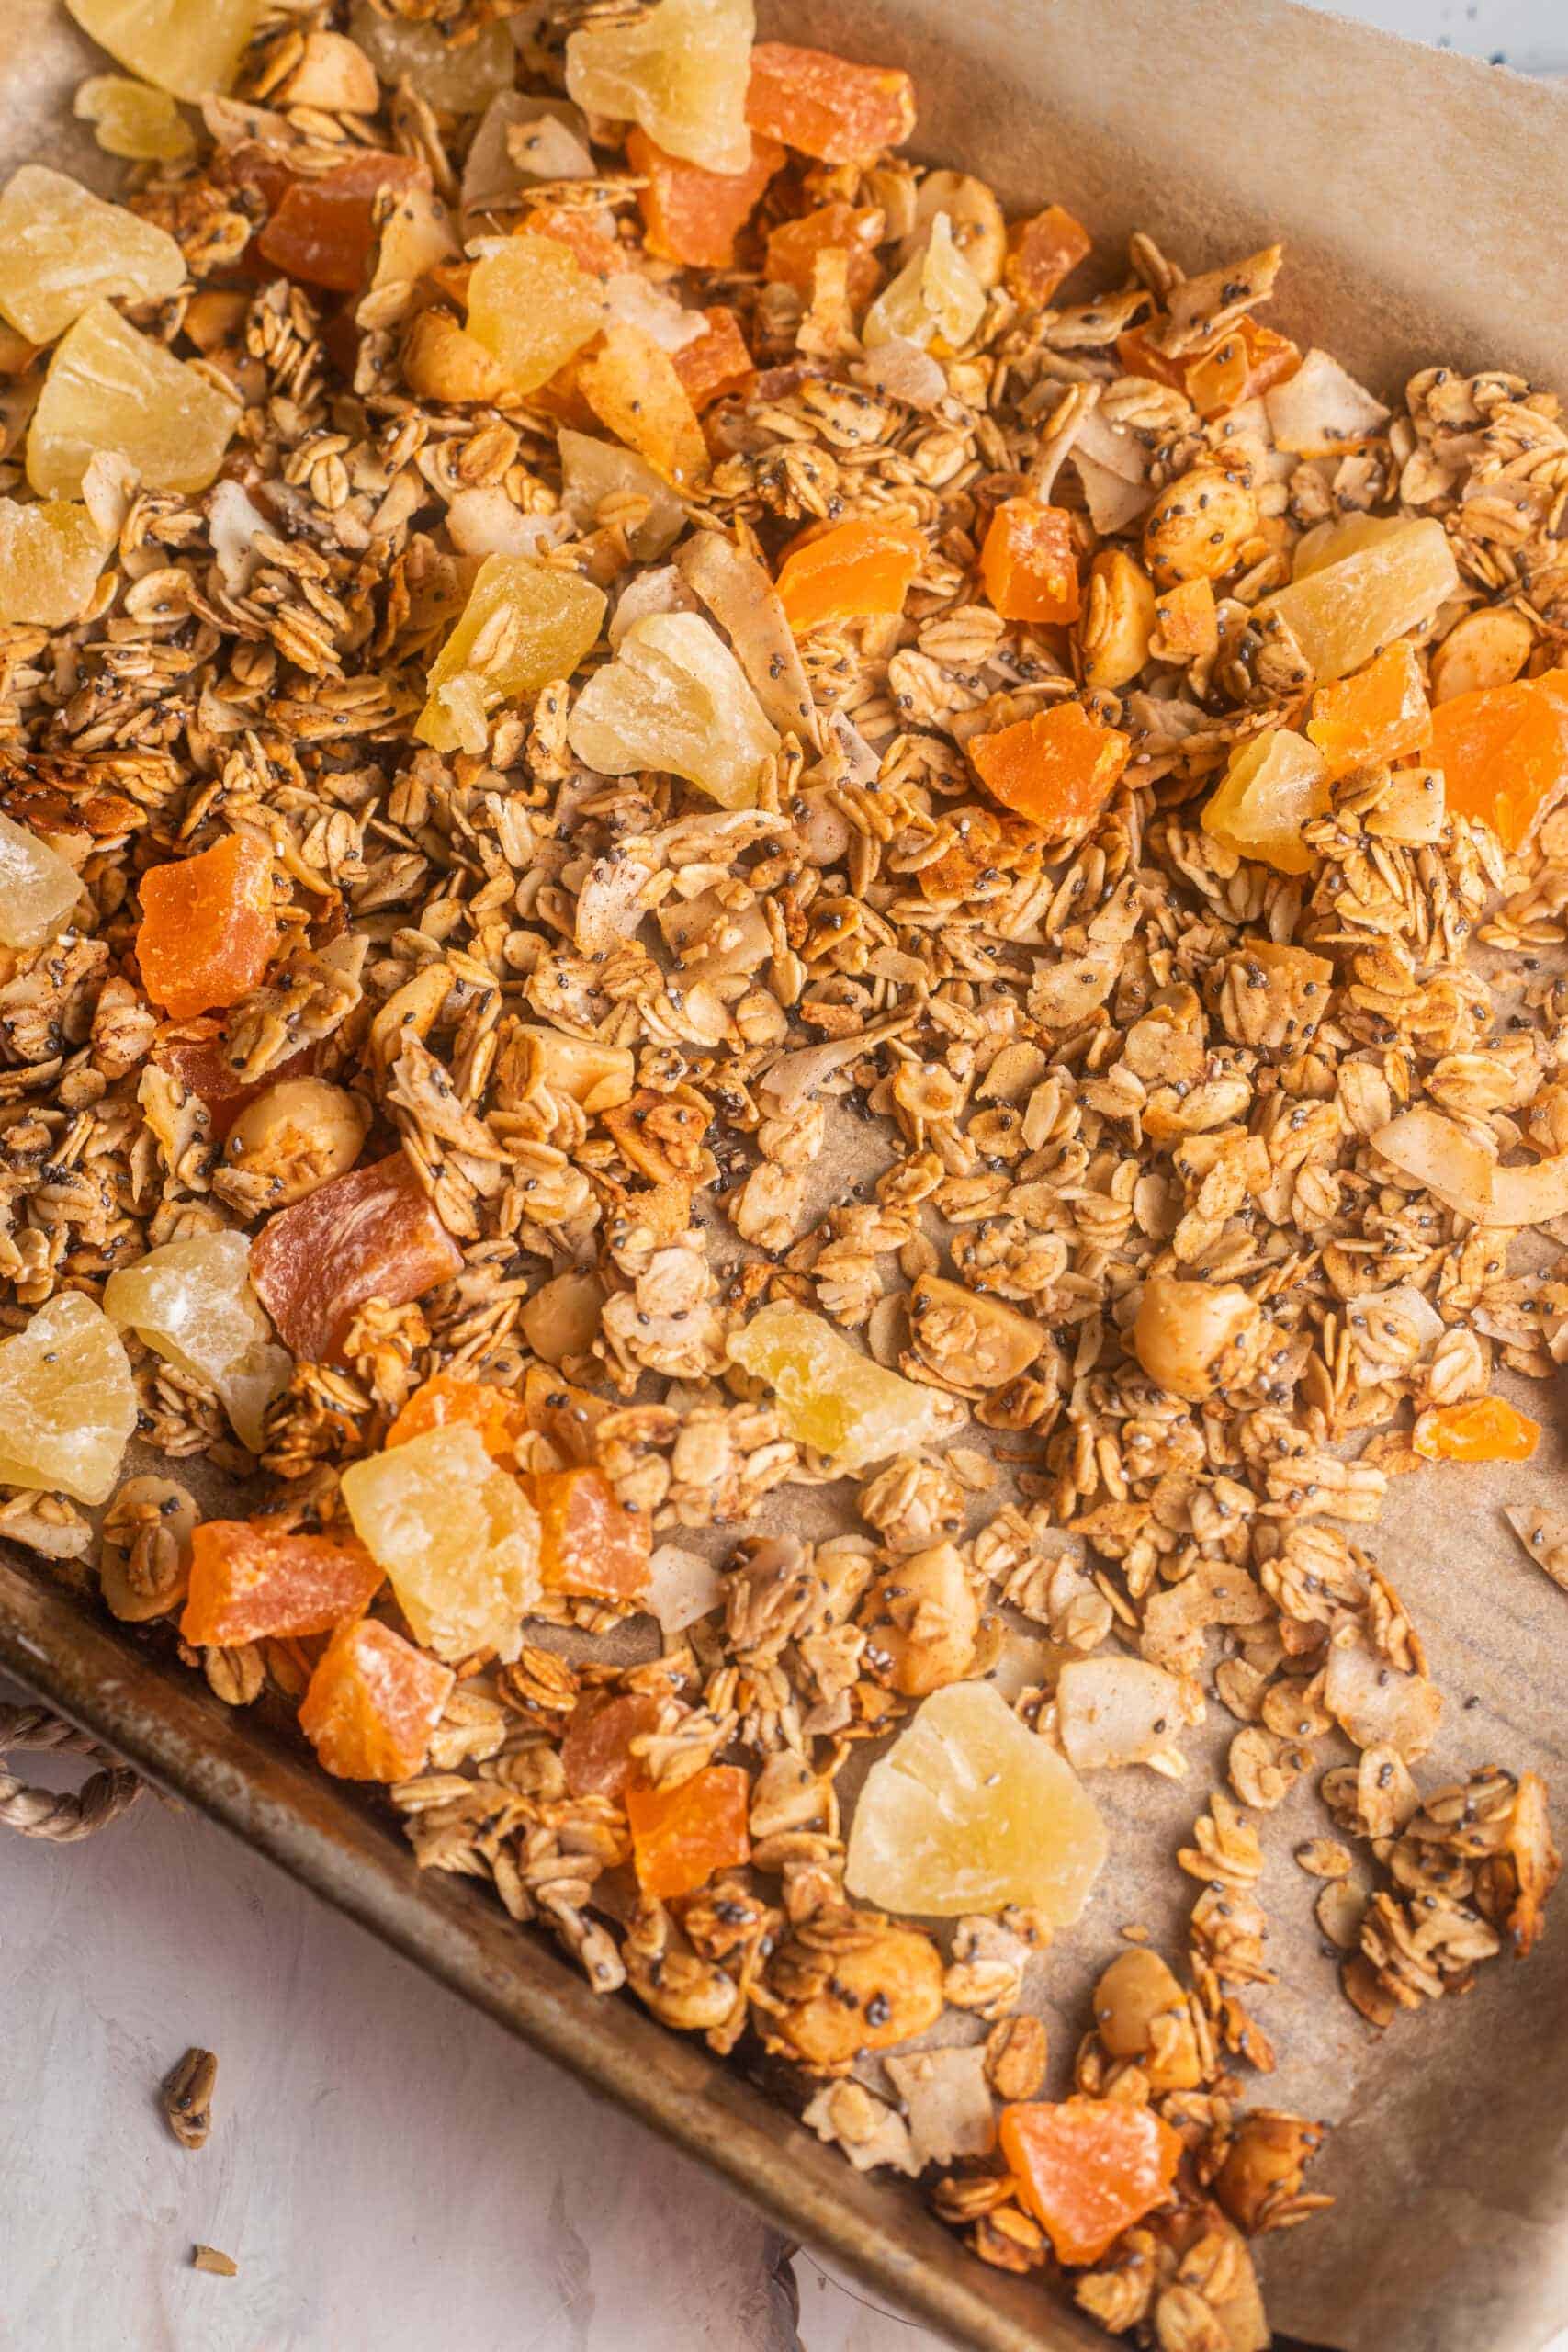 Indulge in 35 yummy and nutritious healthy homemade granola recipes. Try something different with flavors like chewy, crunchy, fruity or nutty. 